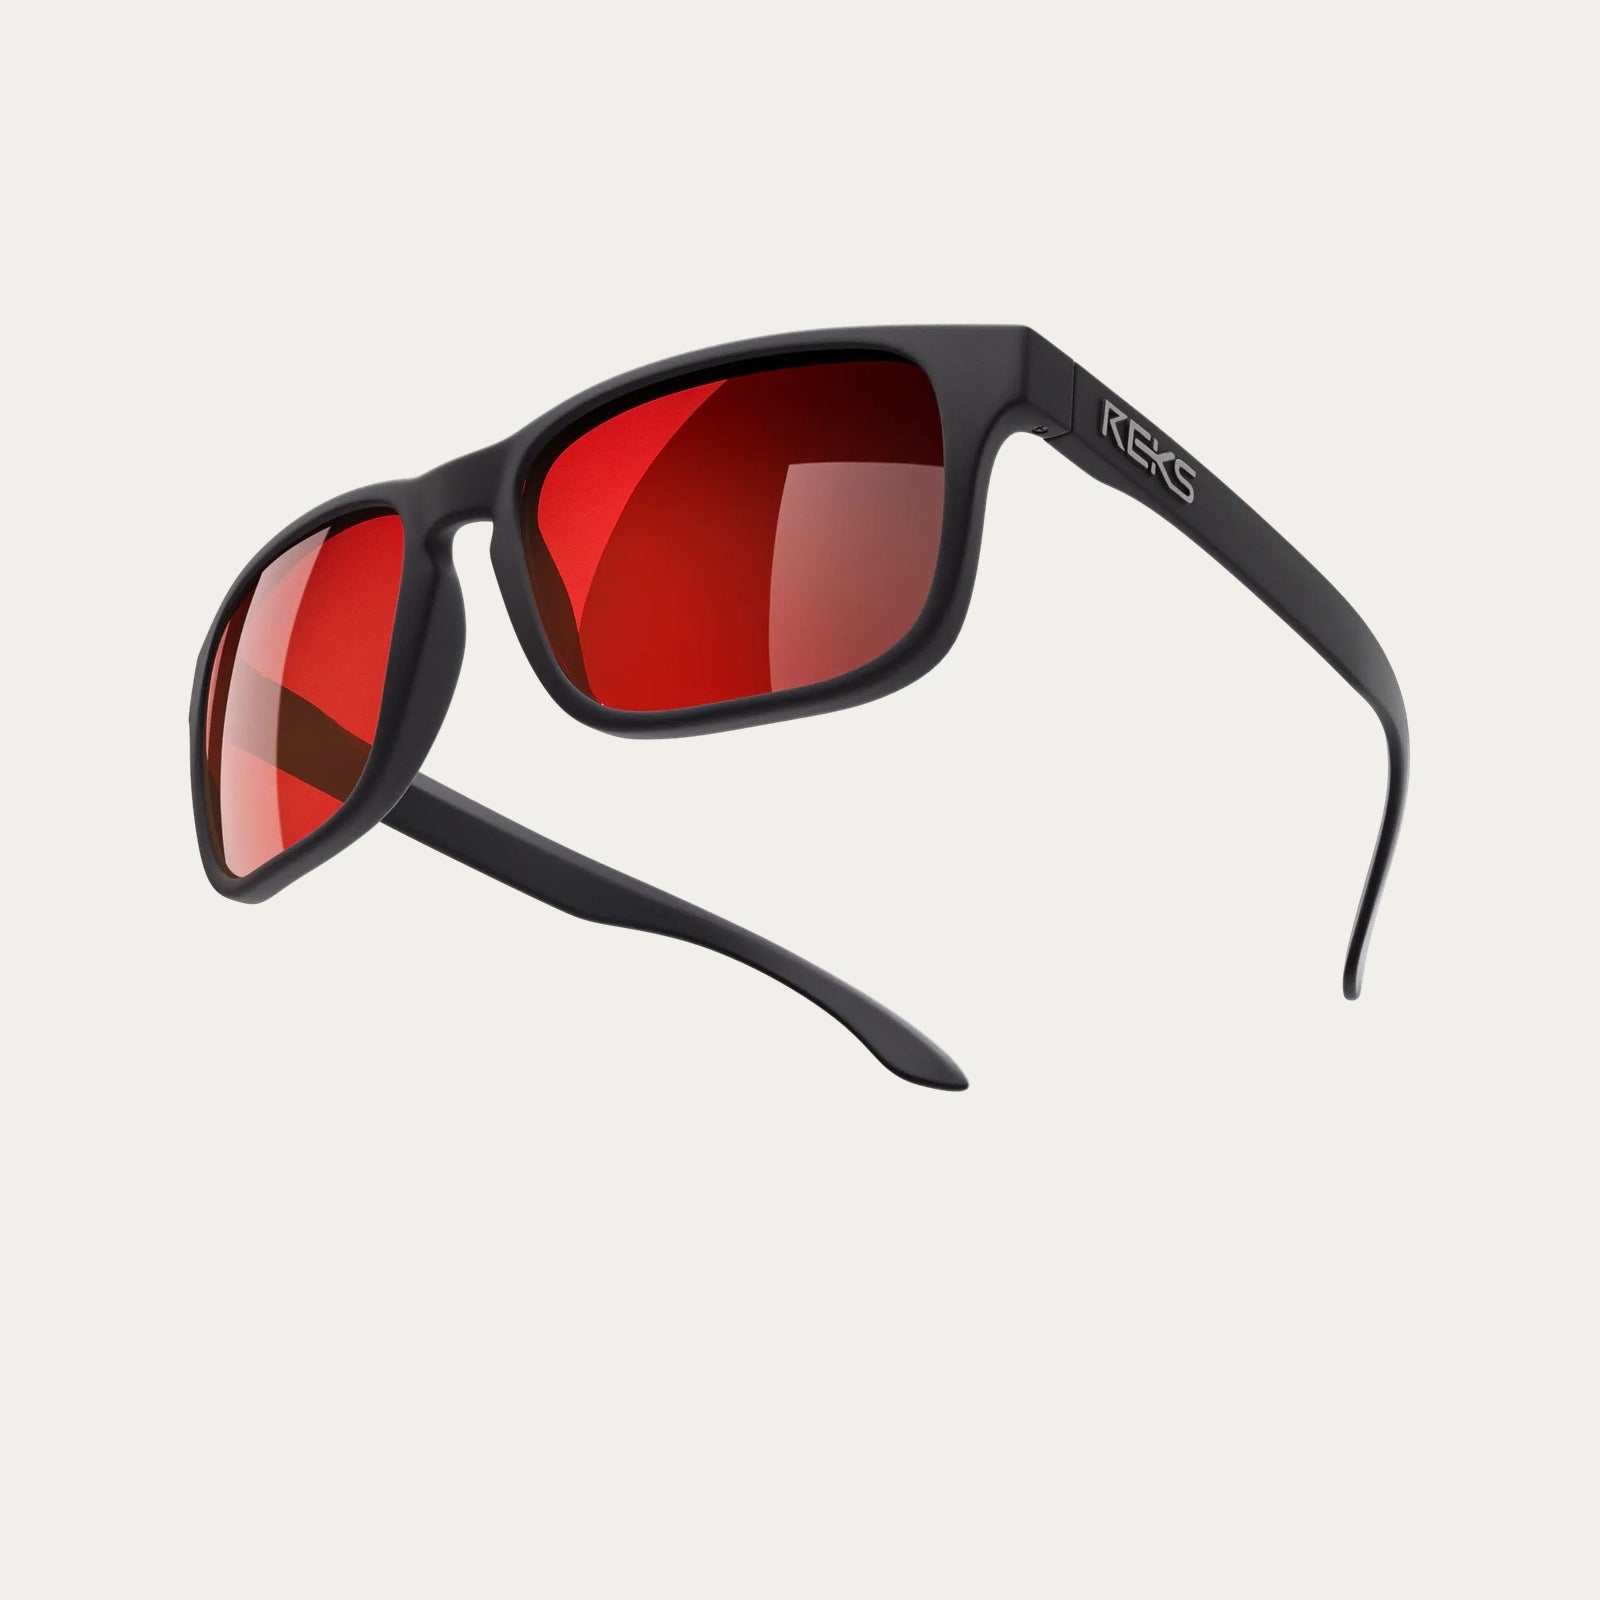 Wrap Around Polycarbonate Sunglasses with anti-reflective coating